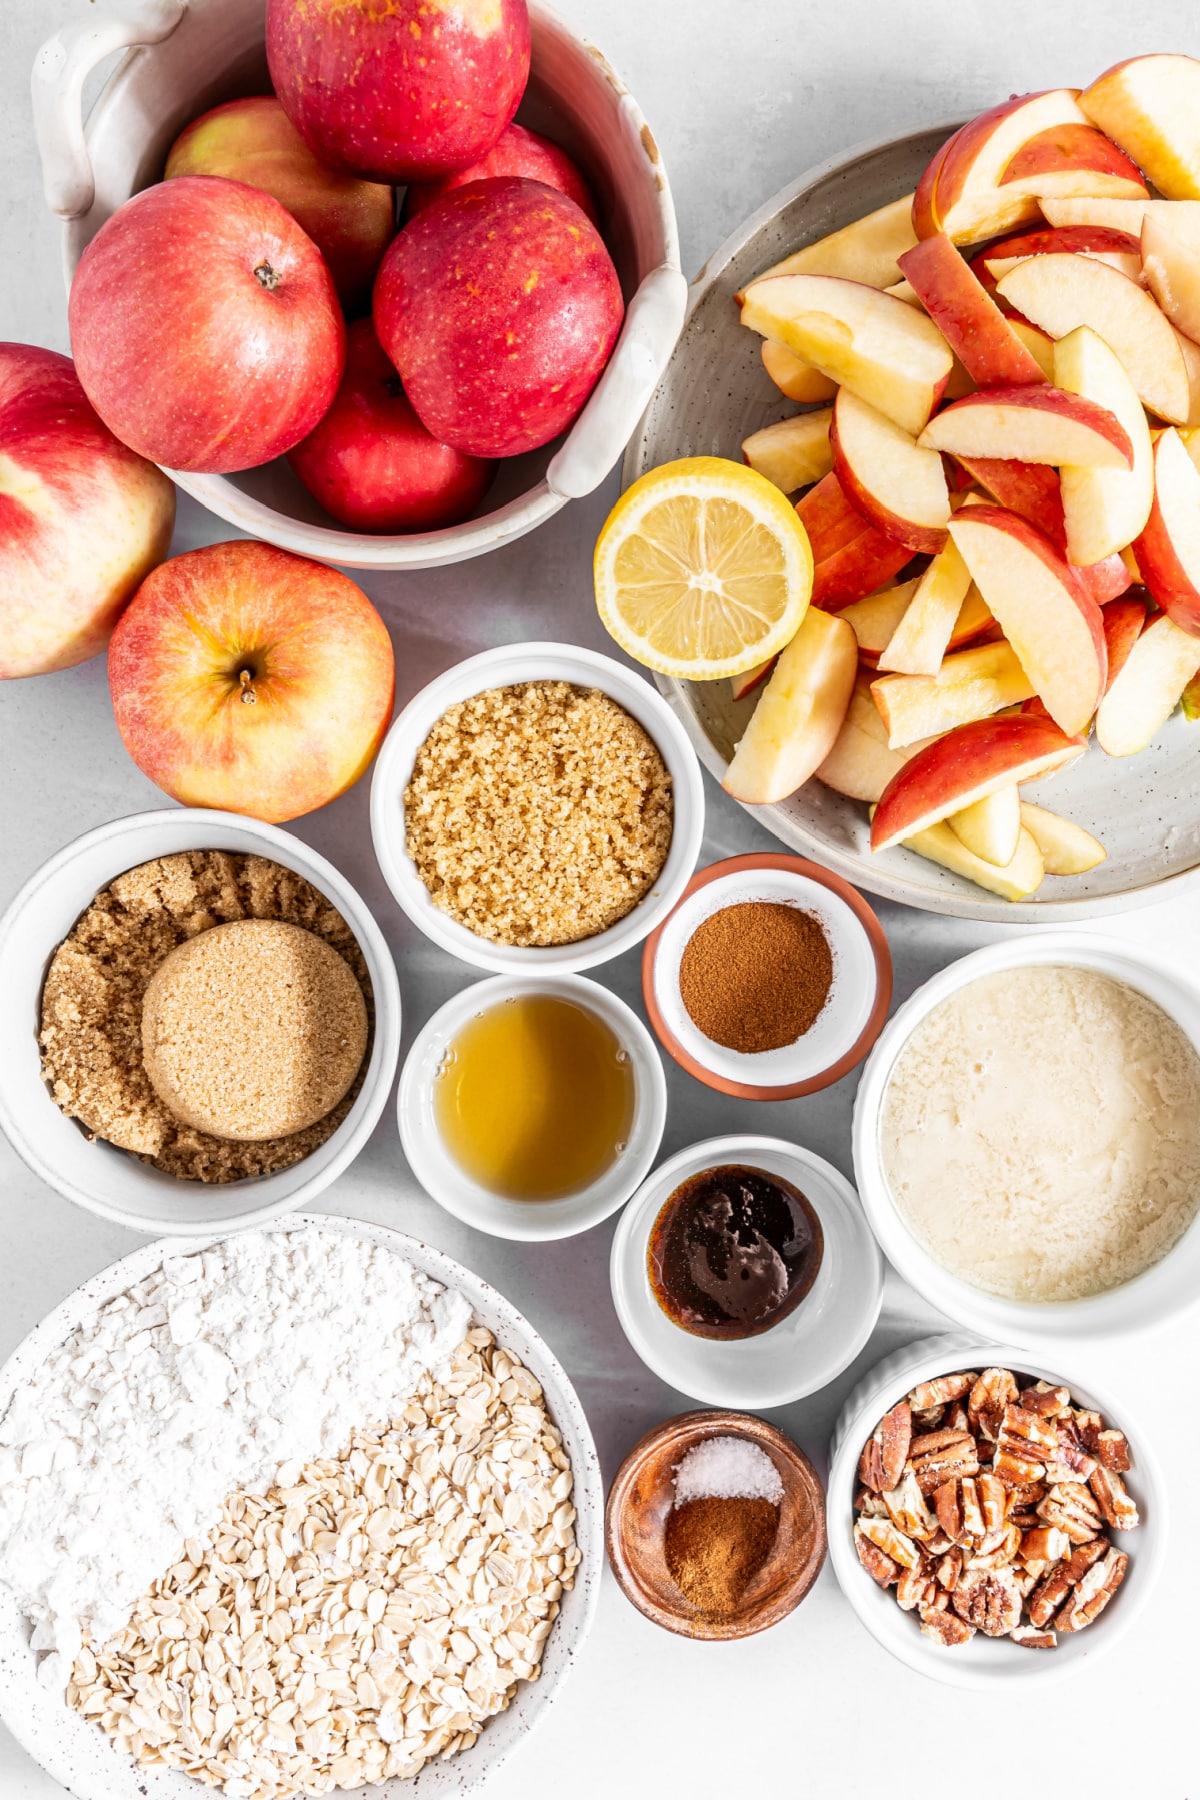 Overhead view of several small bowls of ingredients to make apple crisp: apples, sliced apples, lemon, sugars, spices, flour, oats, and pecan pieces.